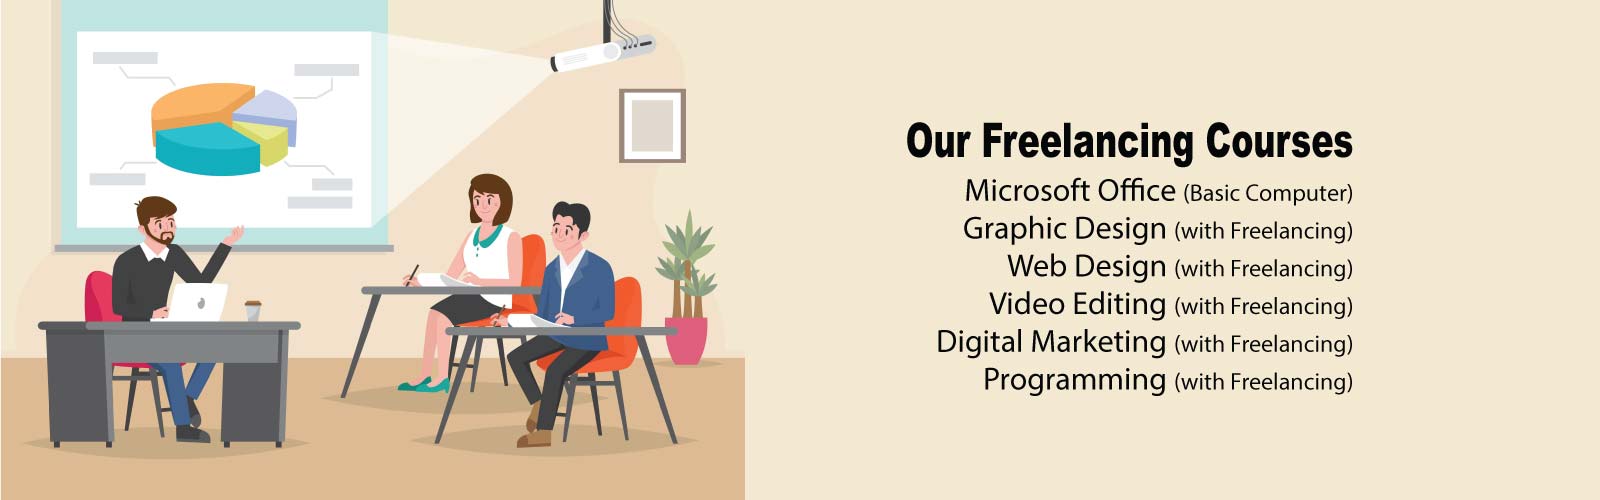 Our Freelancing Courses